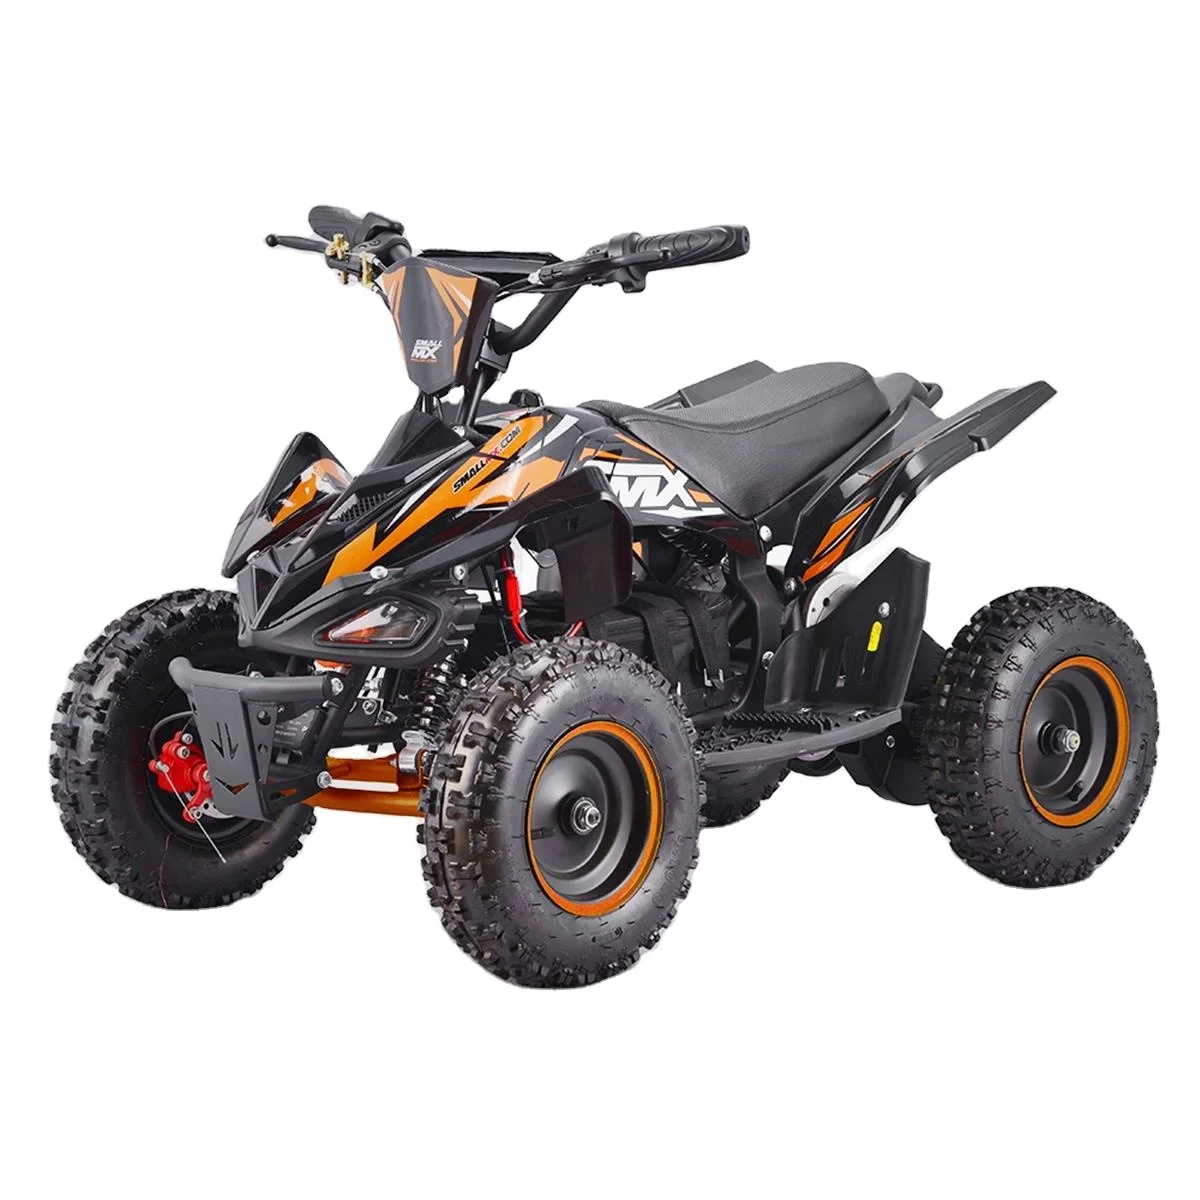 
Tao Motor 800W 1000W Electric ATVs for Adults  (1600228646683)